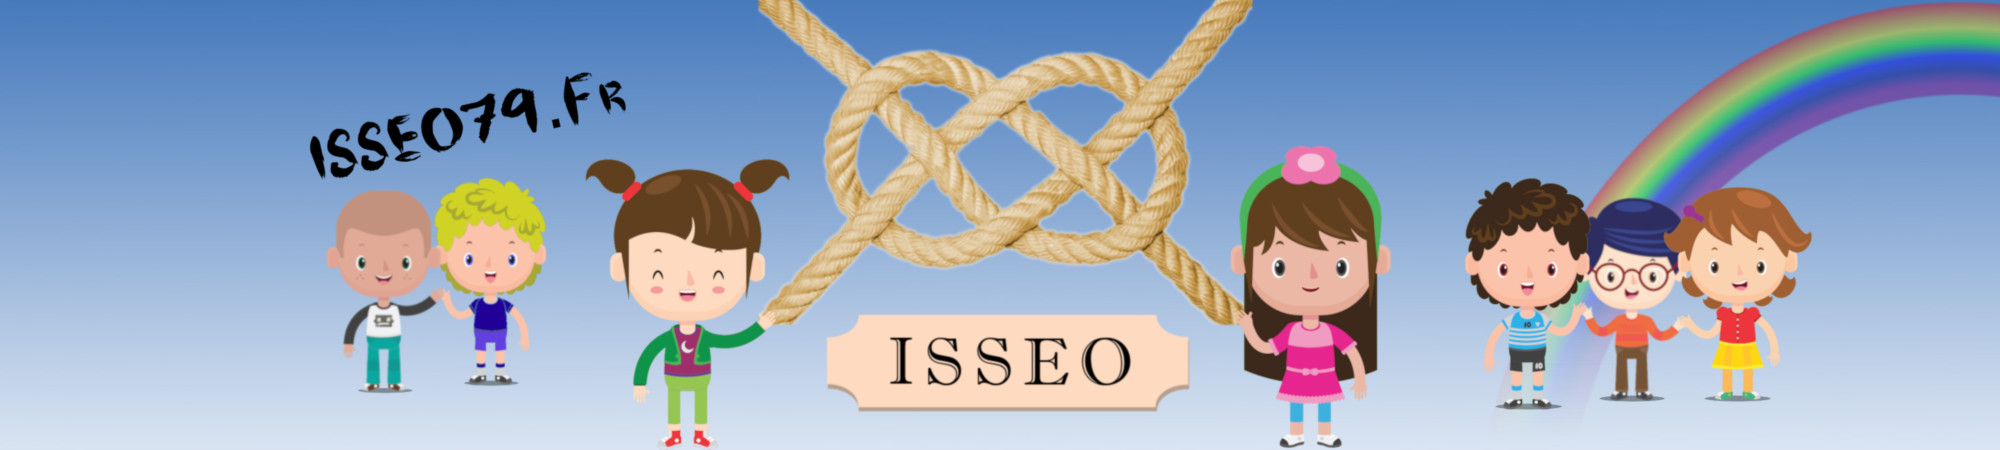 Isseo